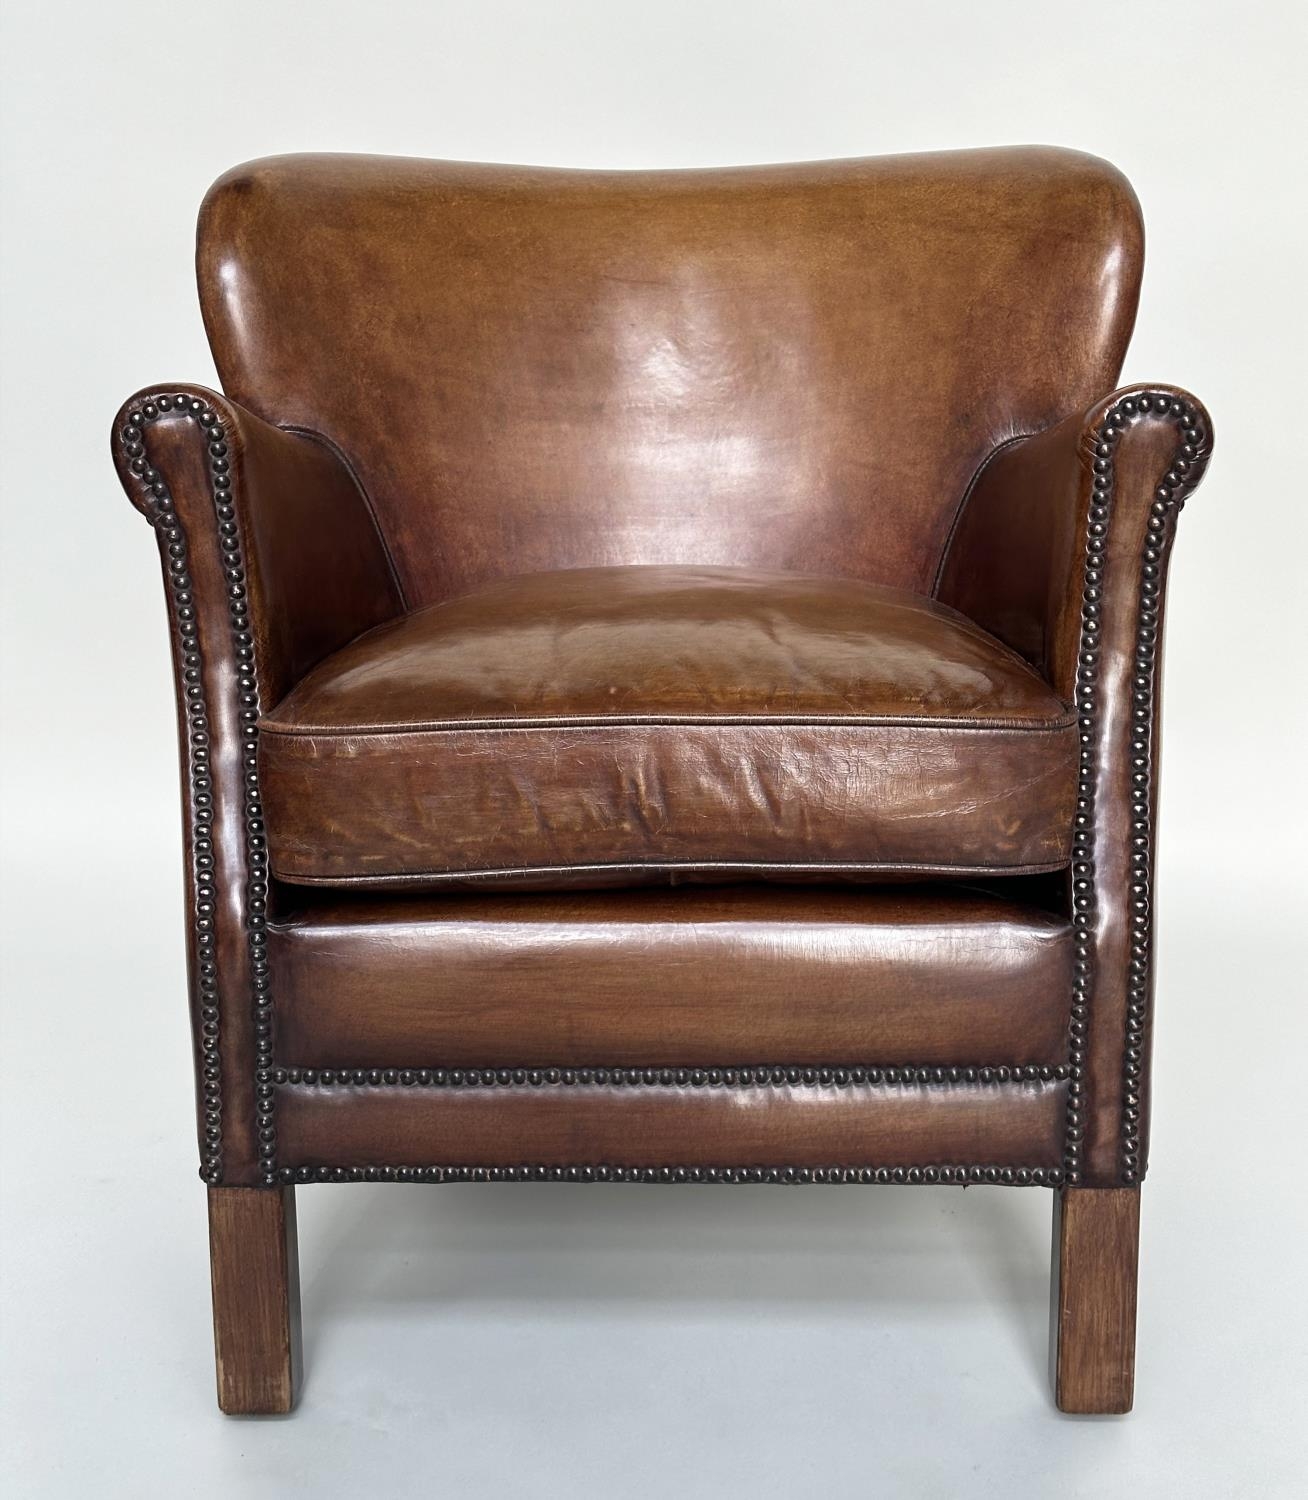 LITTLE PROFESSOR ARMCHAIR, in the manner of Timothy Oulton soft natural mid brown leather upholstery - Image 8 of 9